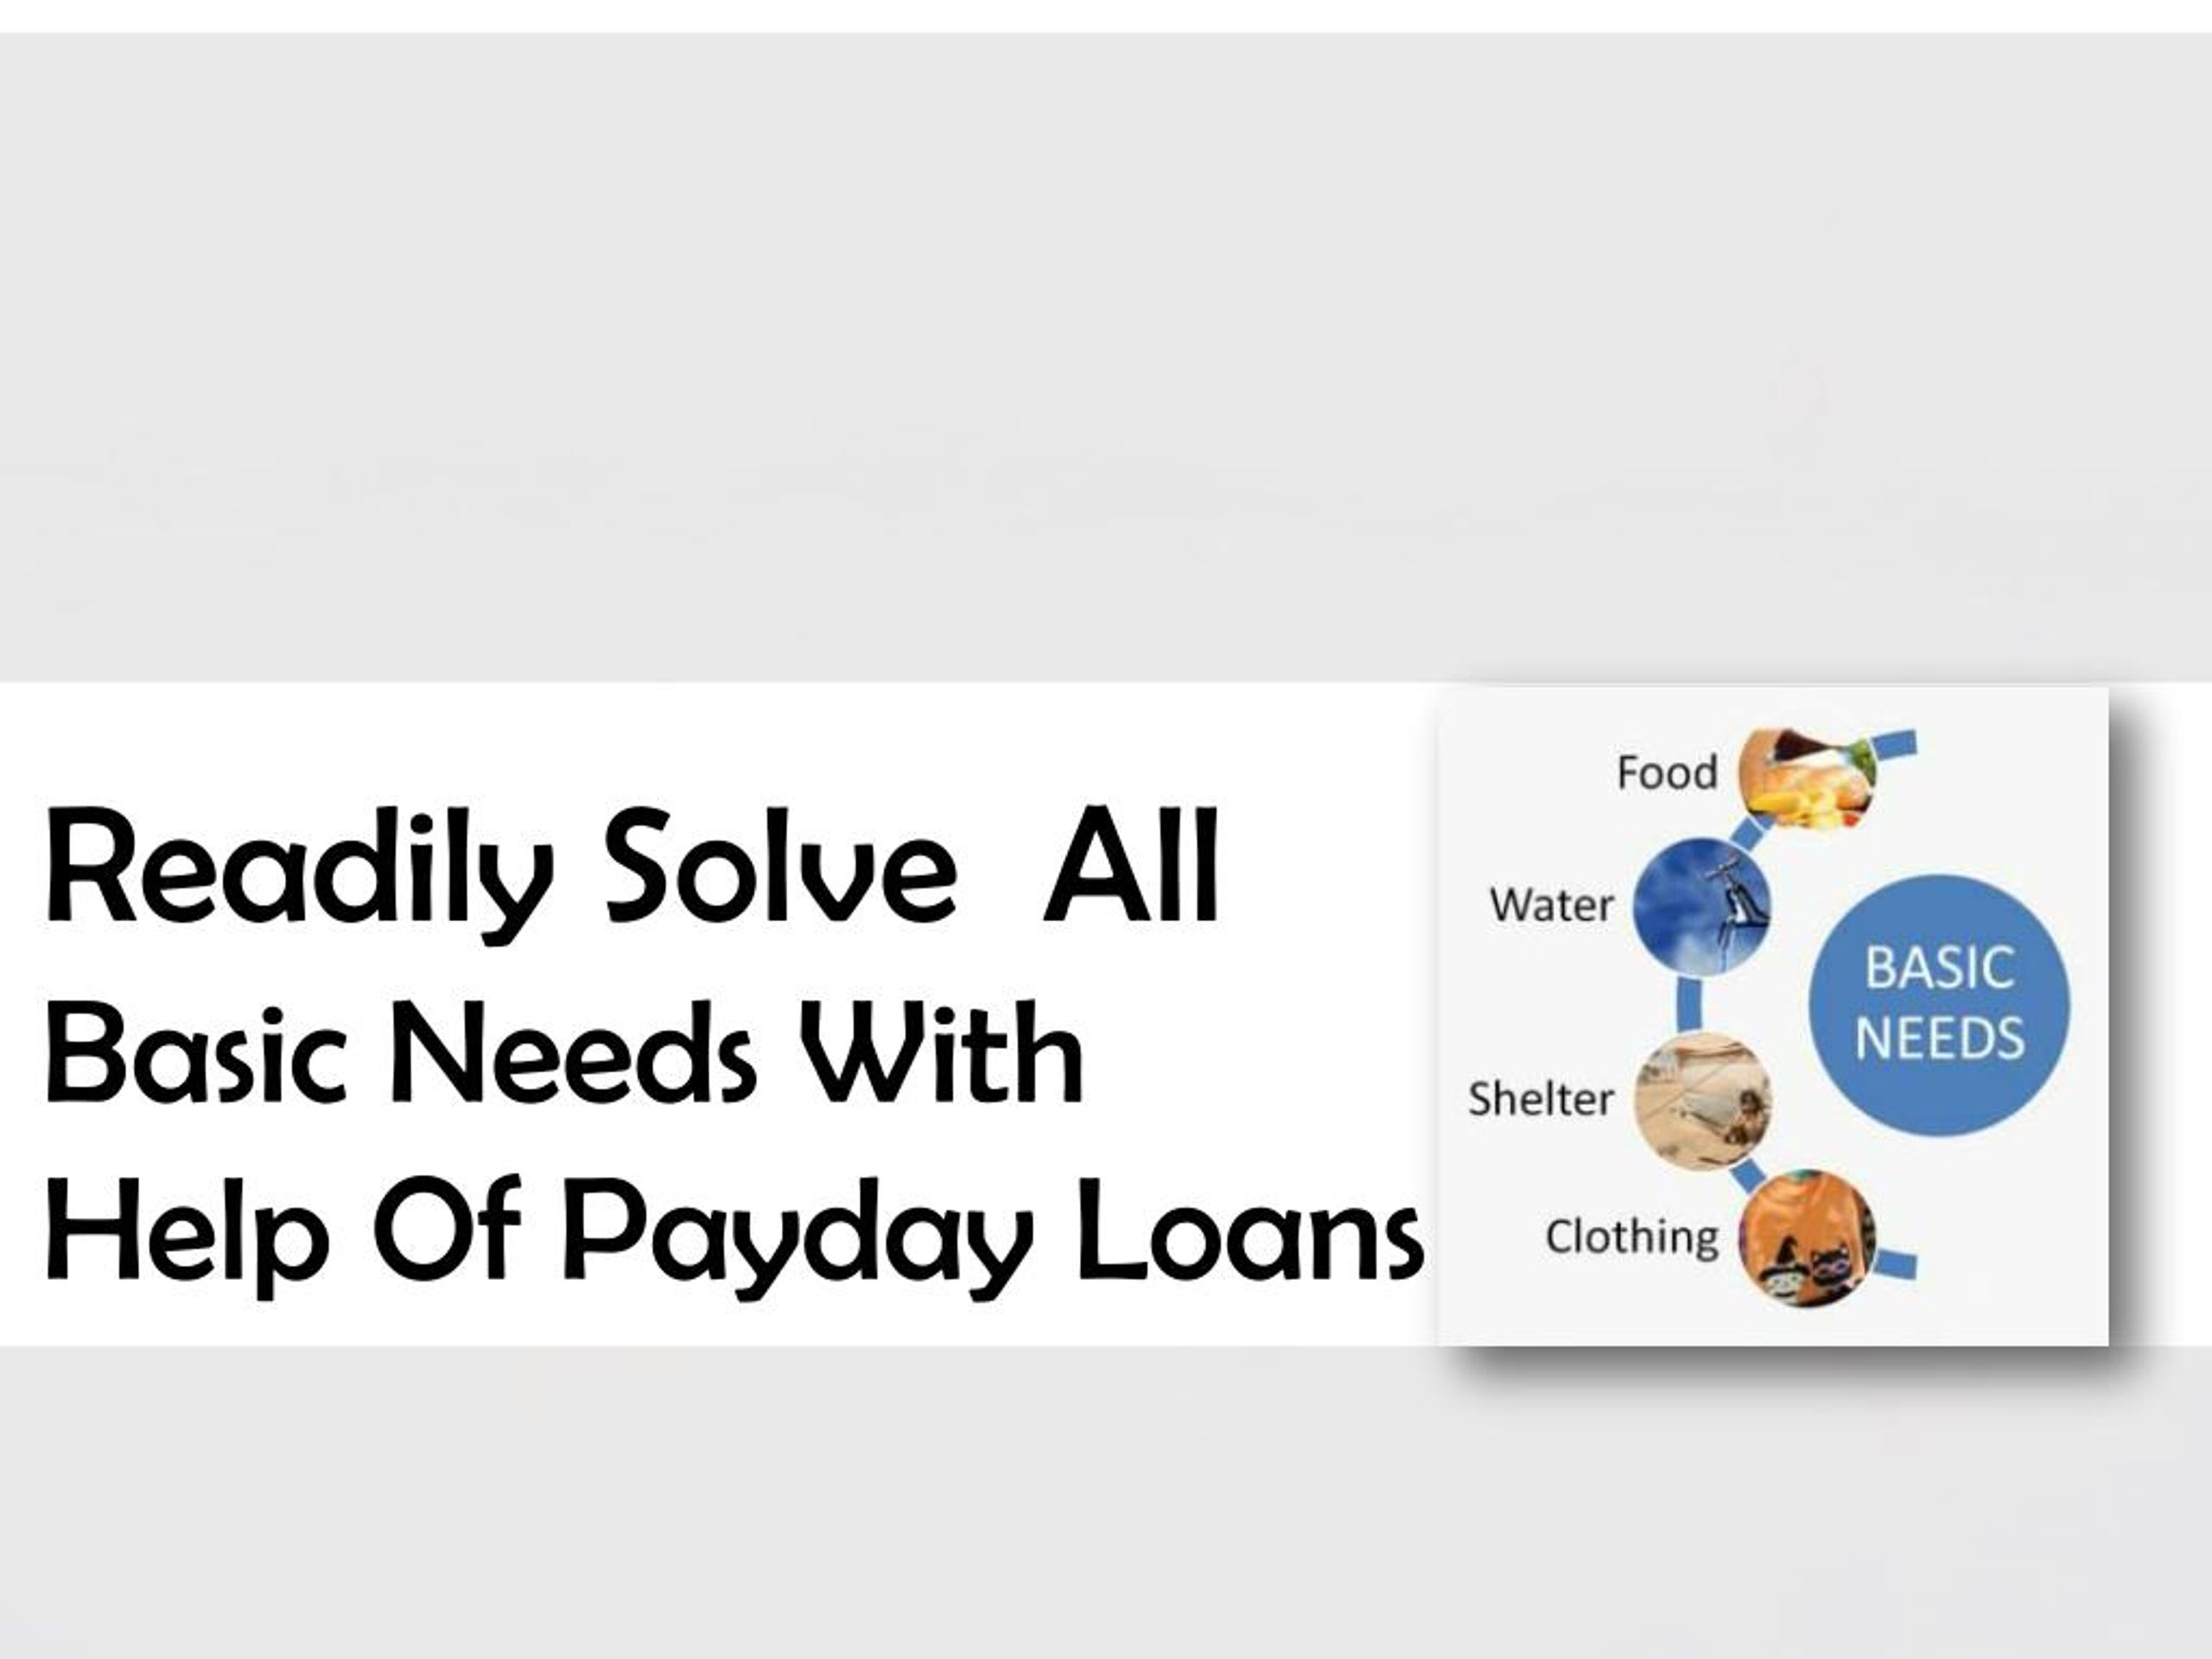 payday loans near me